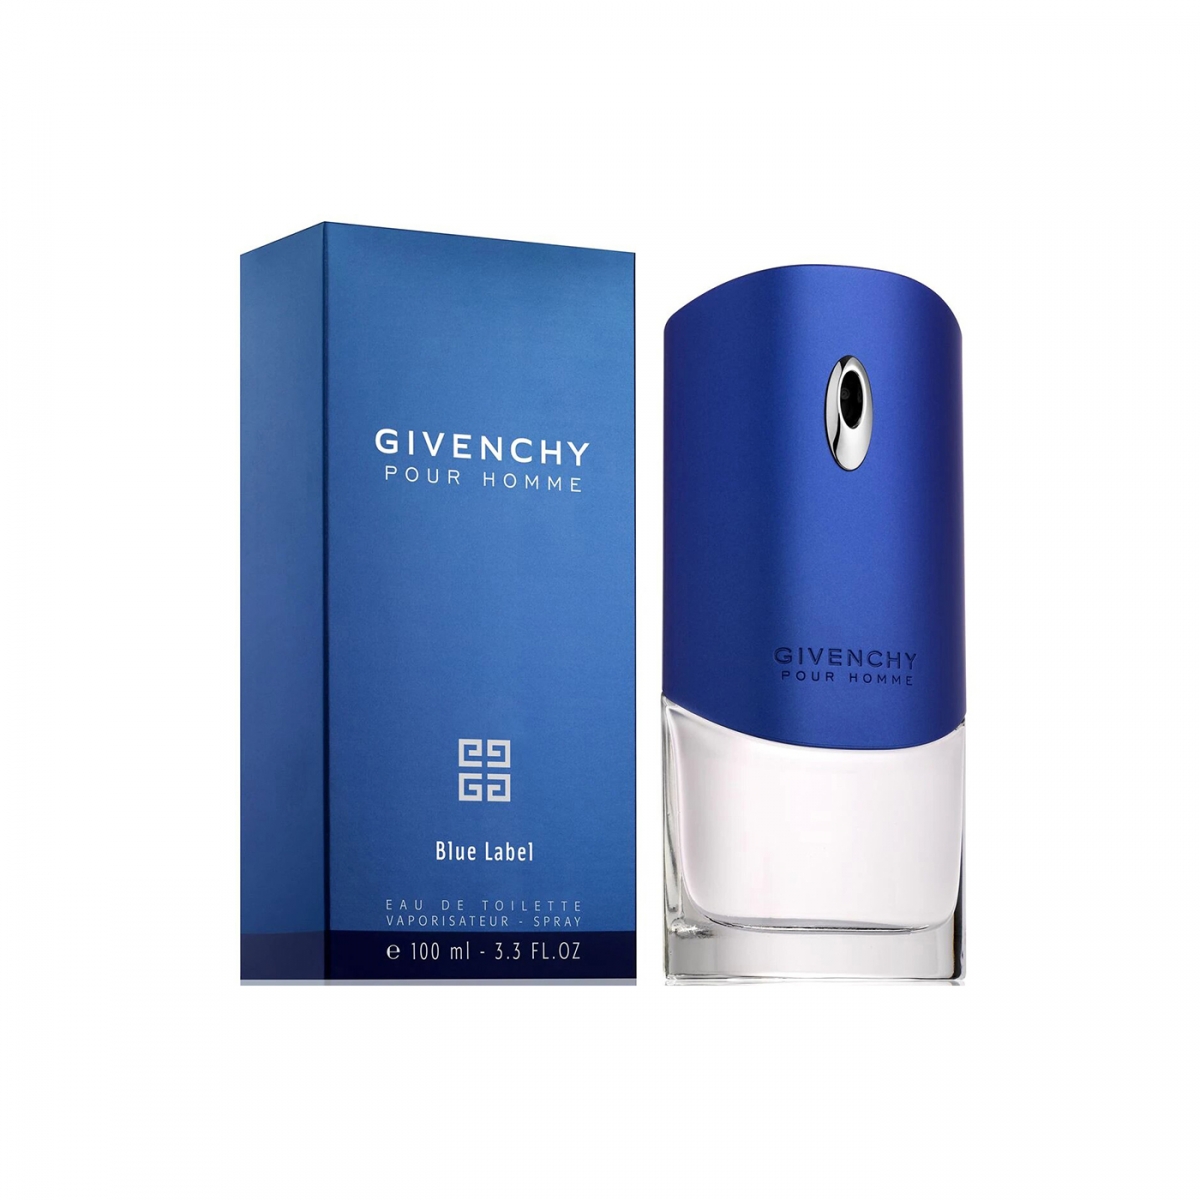 Pour homme для мужчин. Givenchy pour homme Blue Label. Духи Givenchy pour homme. Мужские духи Givenchy "pour homme Blue Label" 100 ml. Givenchy "pour homme" EDT, 100ml.